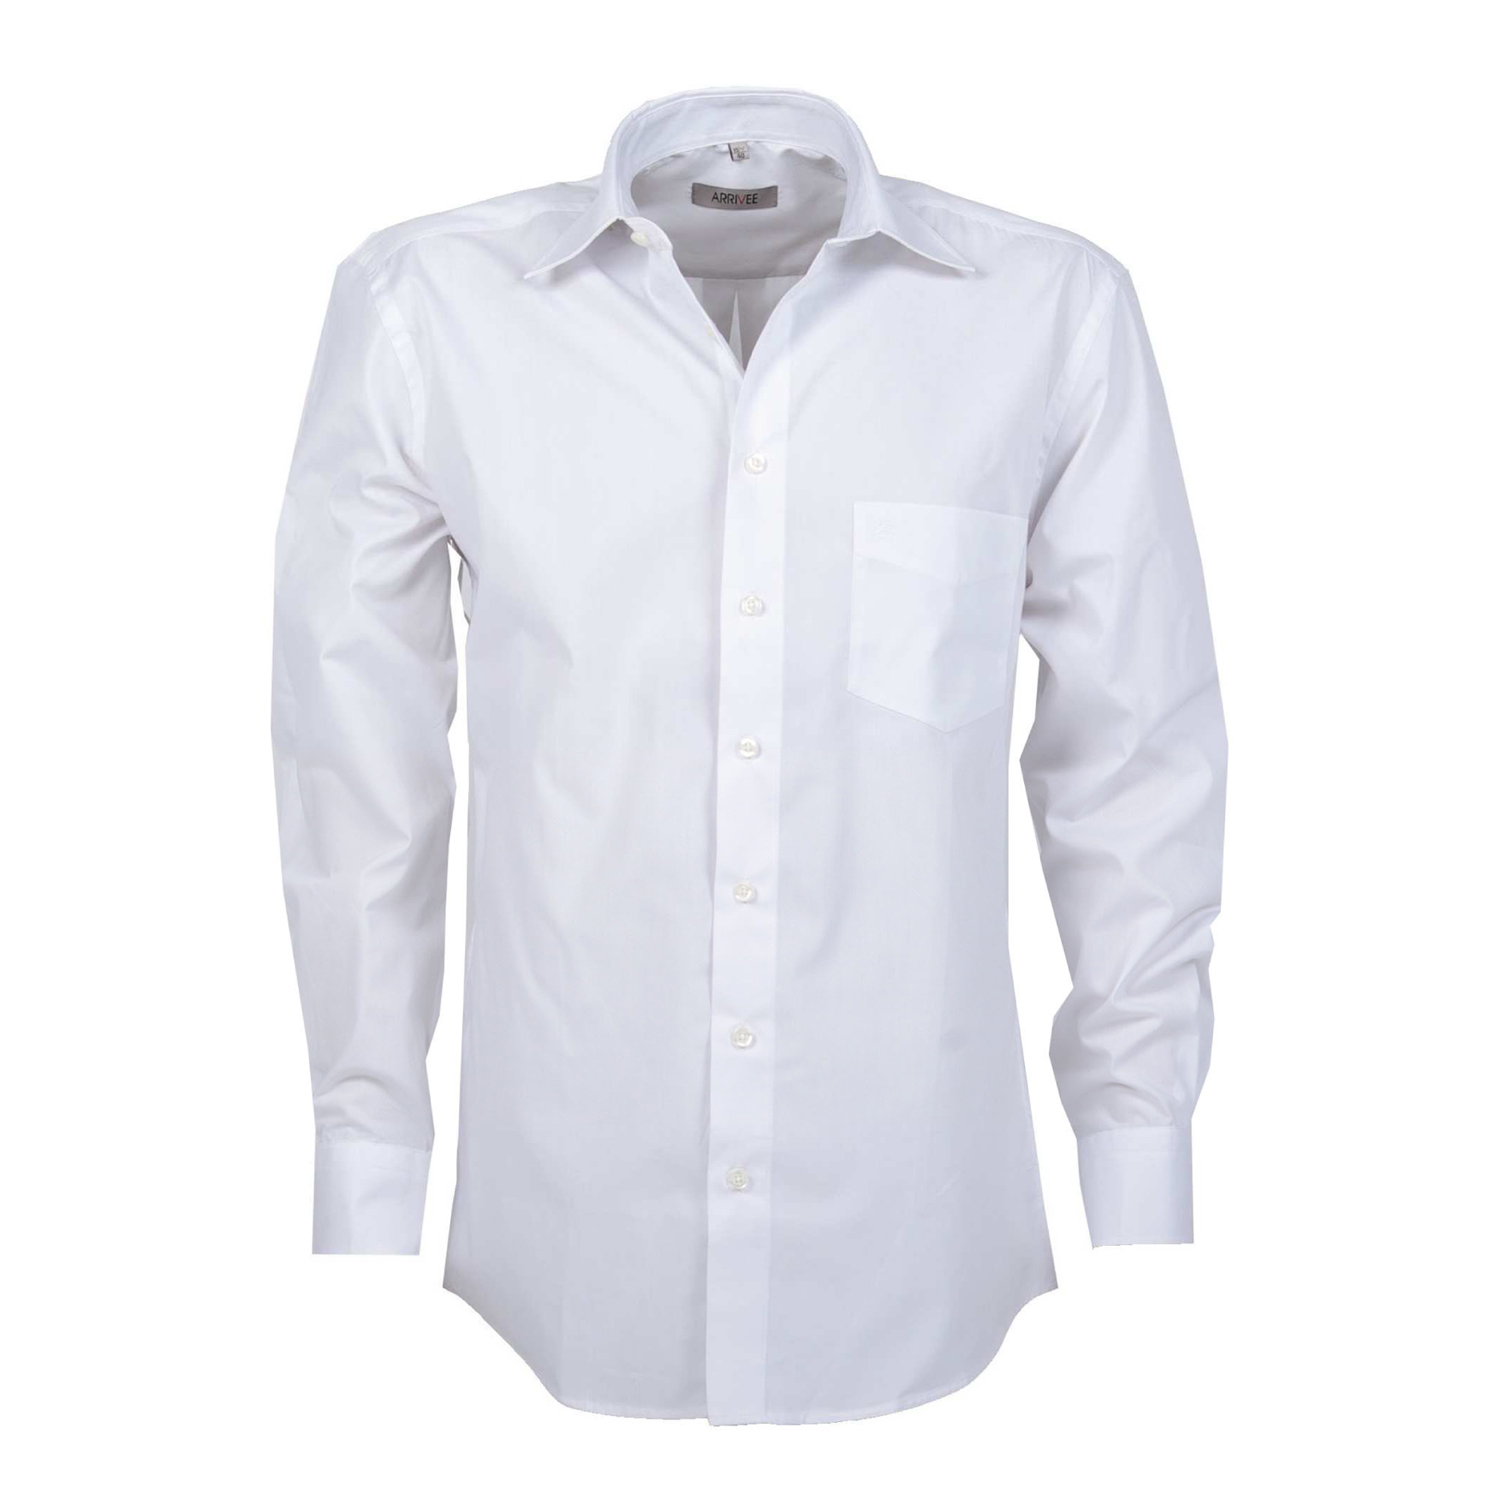 White shirt by ARRIVEE in big sizes XL up to 8XL